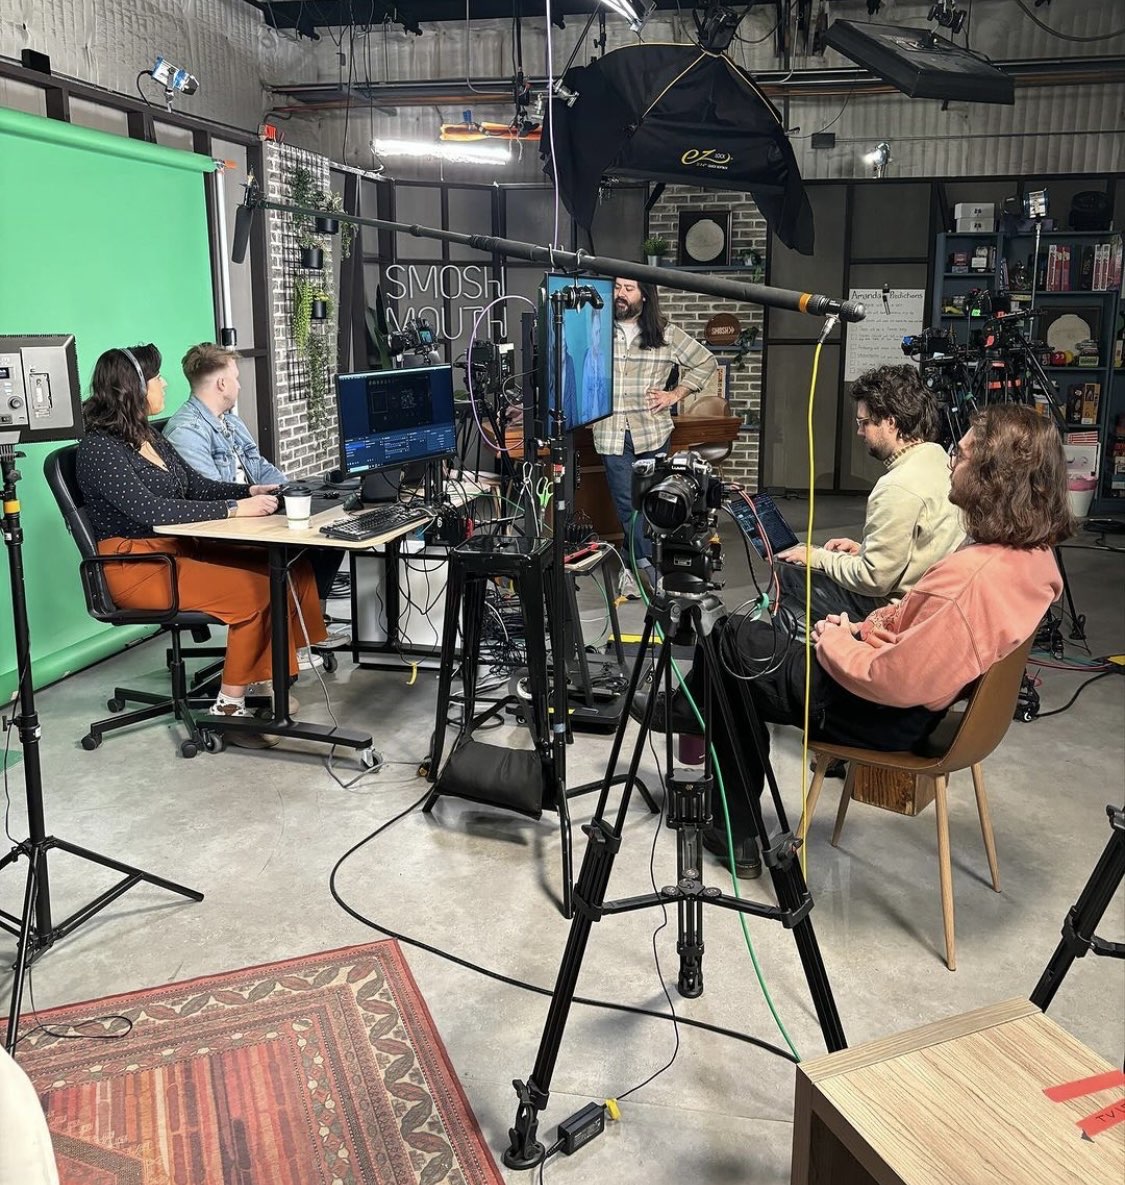 behind the scenes of smosh games recording set with shayne topp and amanda lehan canto playing in front of a green screen, while alex tran and spencer agnew observe from across them